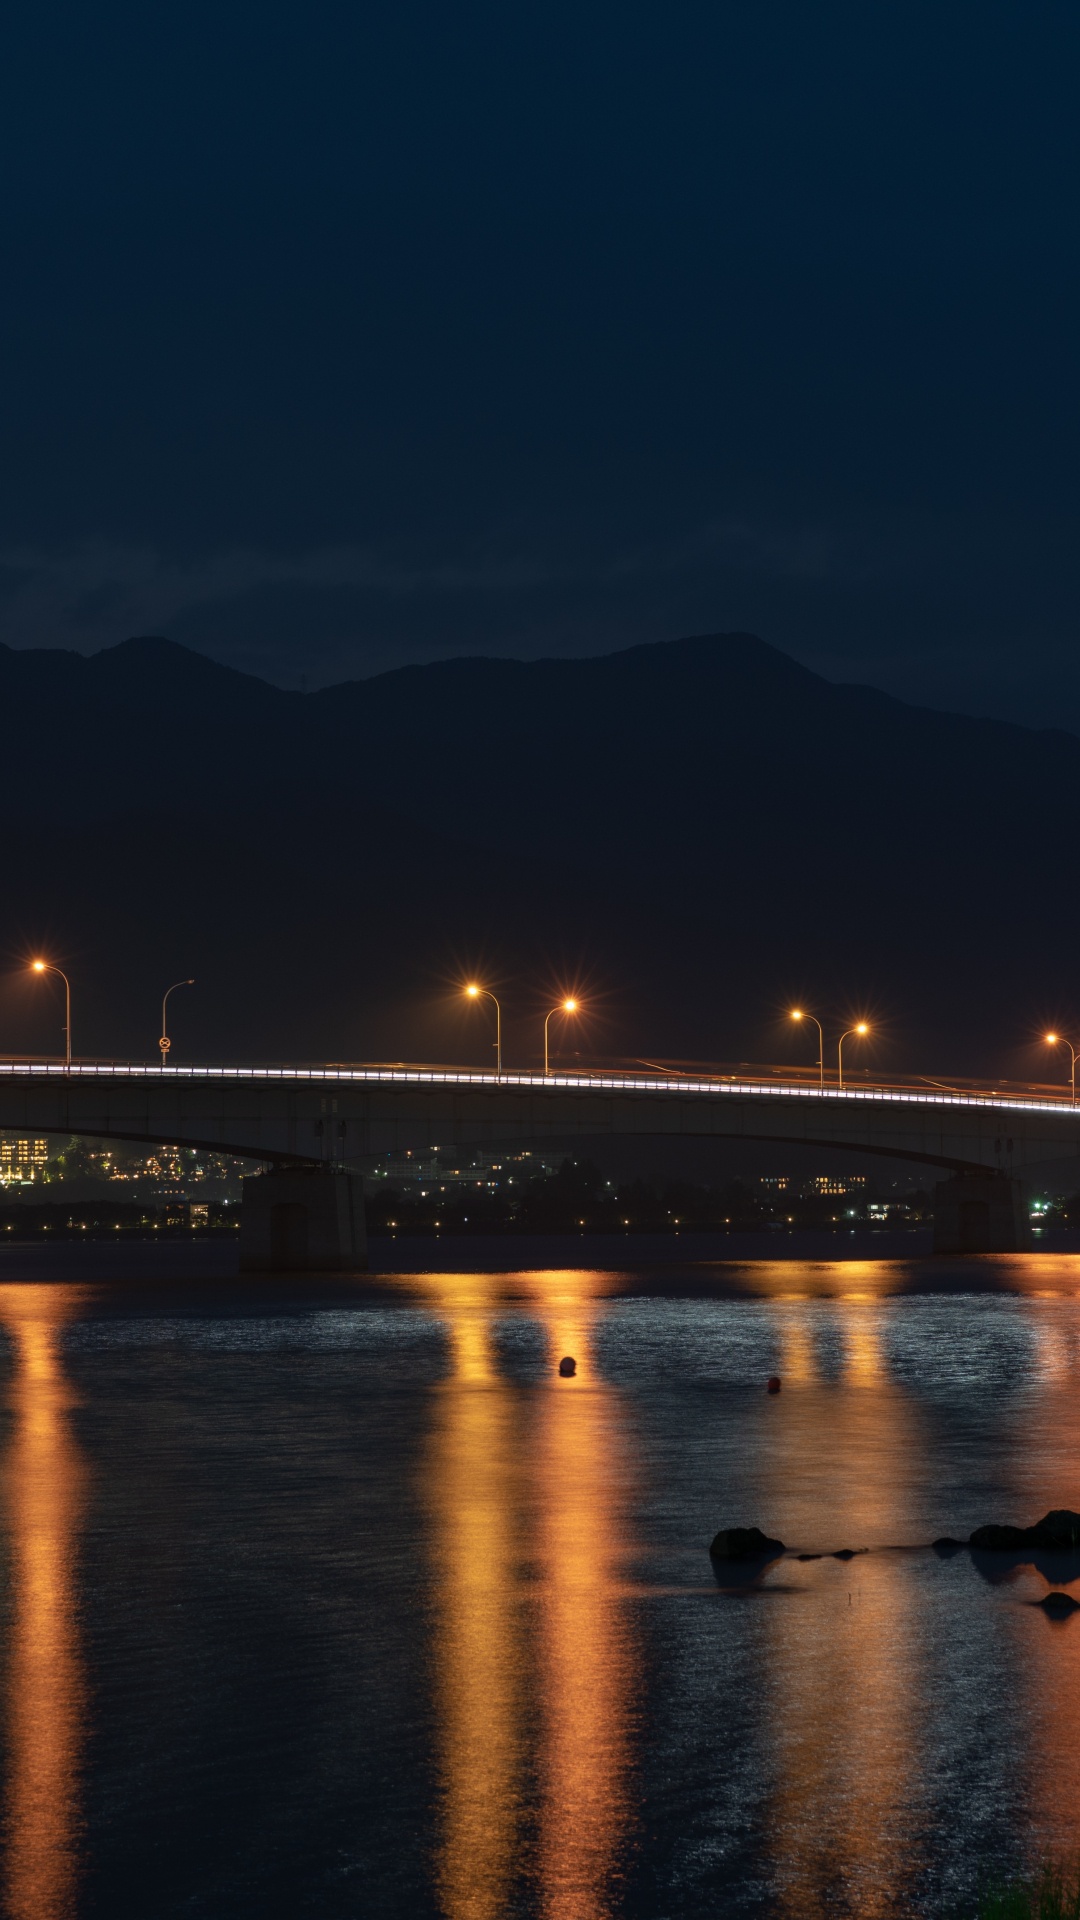 Lighted Bridge Over Water During Night Time. Wallpaper in 1080x1920 Resolution